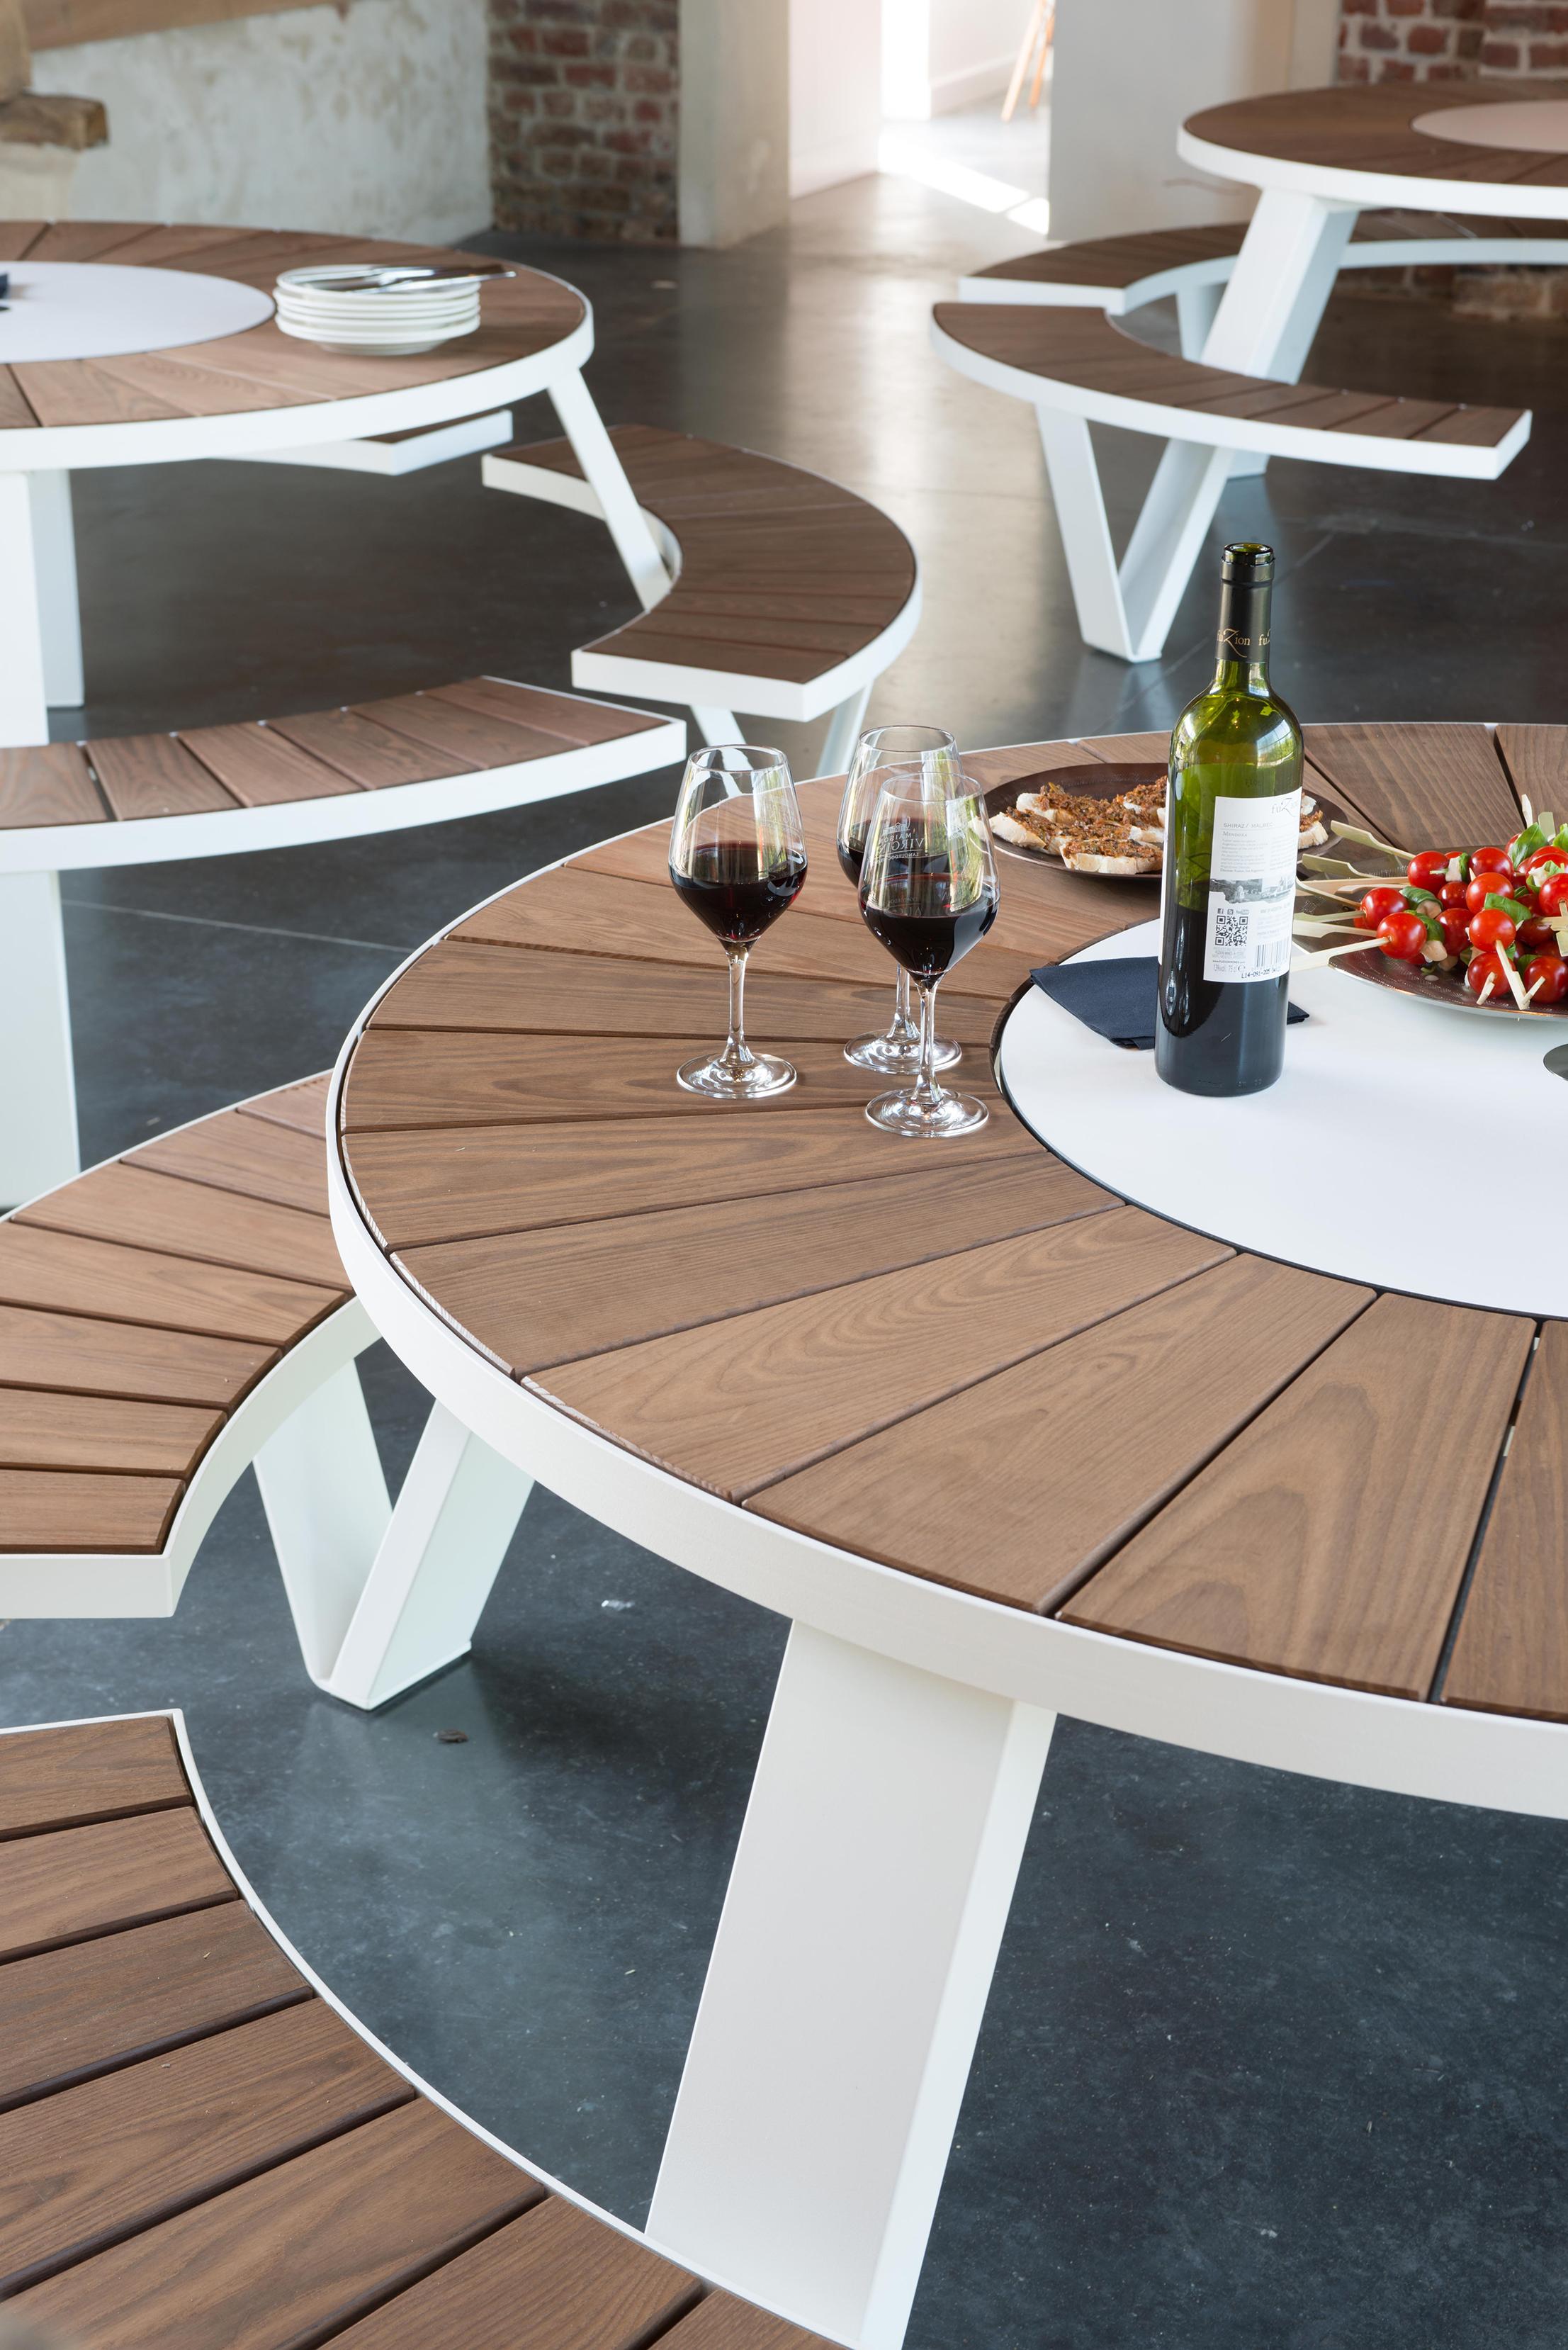 Modern Pantagruel Picnic Table with Inumbra Parasol Design by Extremis For Sale